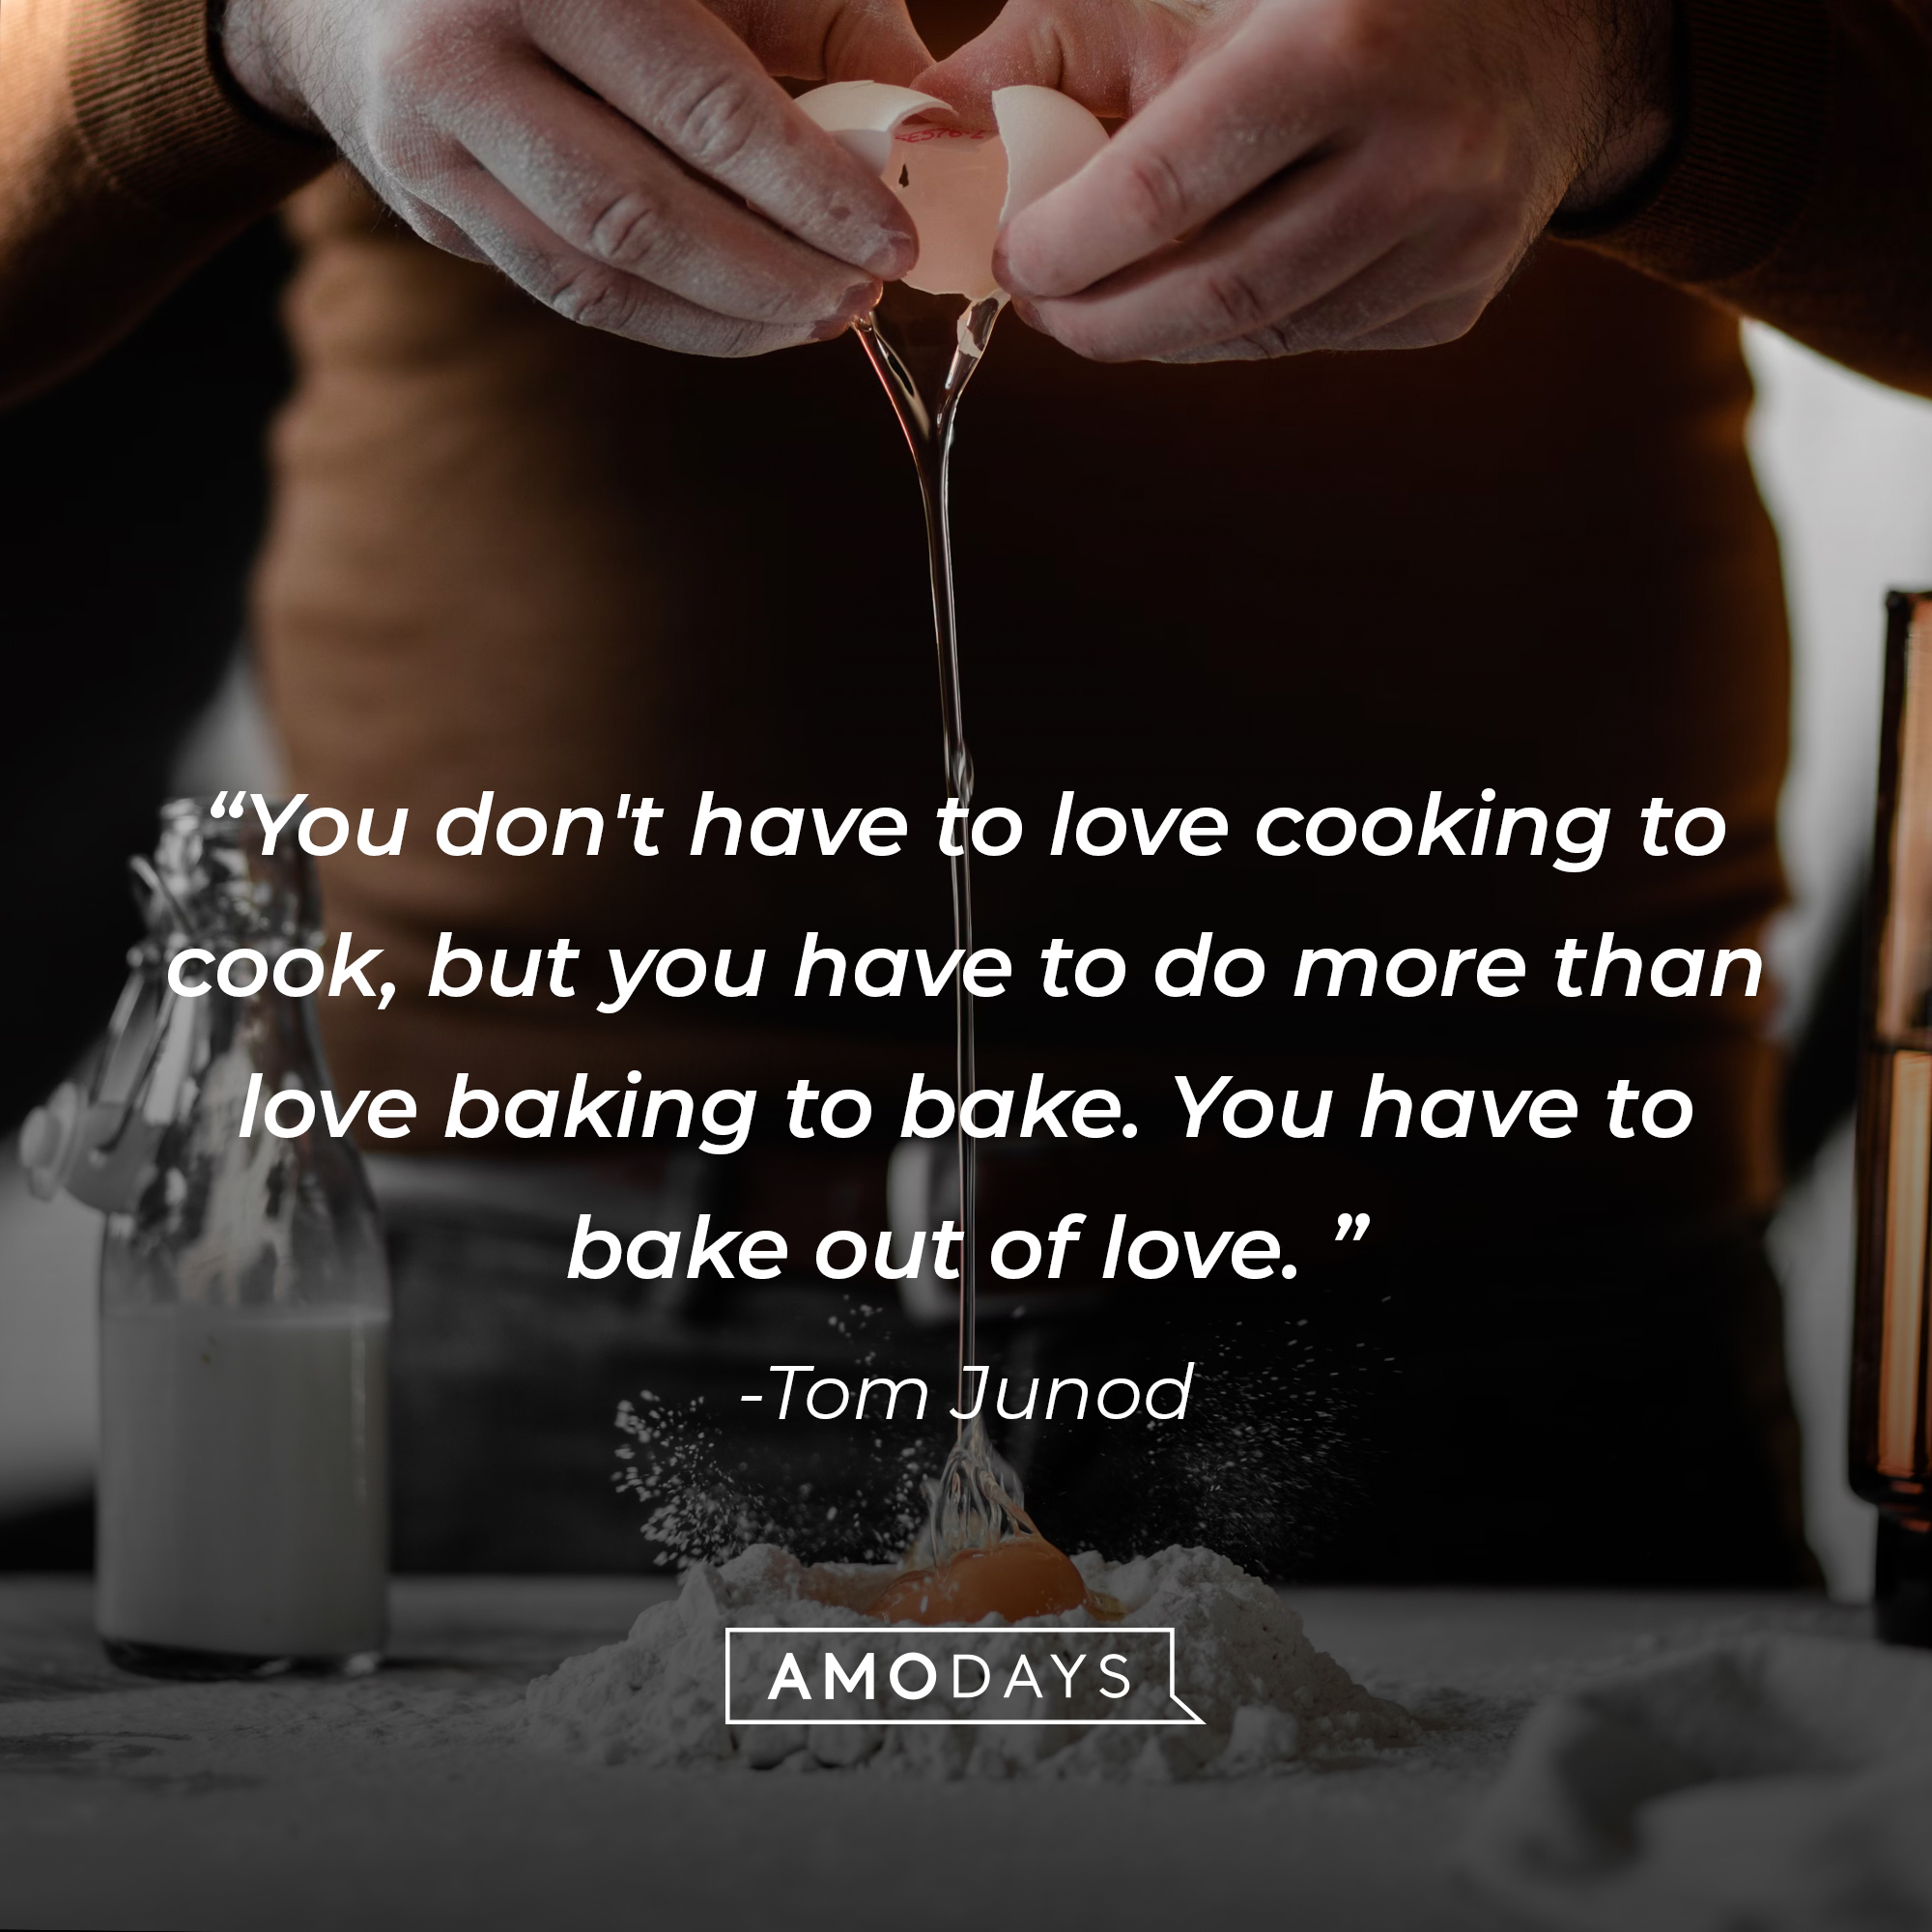 Tom Junod's quote: "You don't have to love cooking to cook, but you have to do more than love baking to bake. You have to bake out of love." Source: Brainyquote